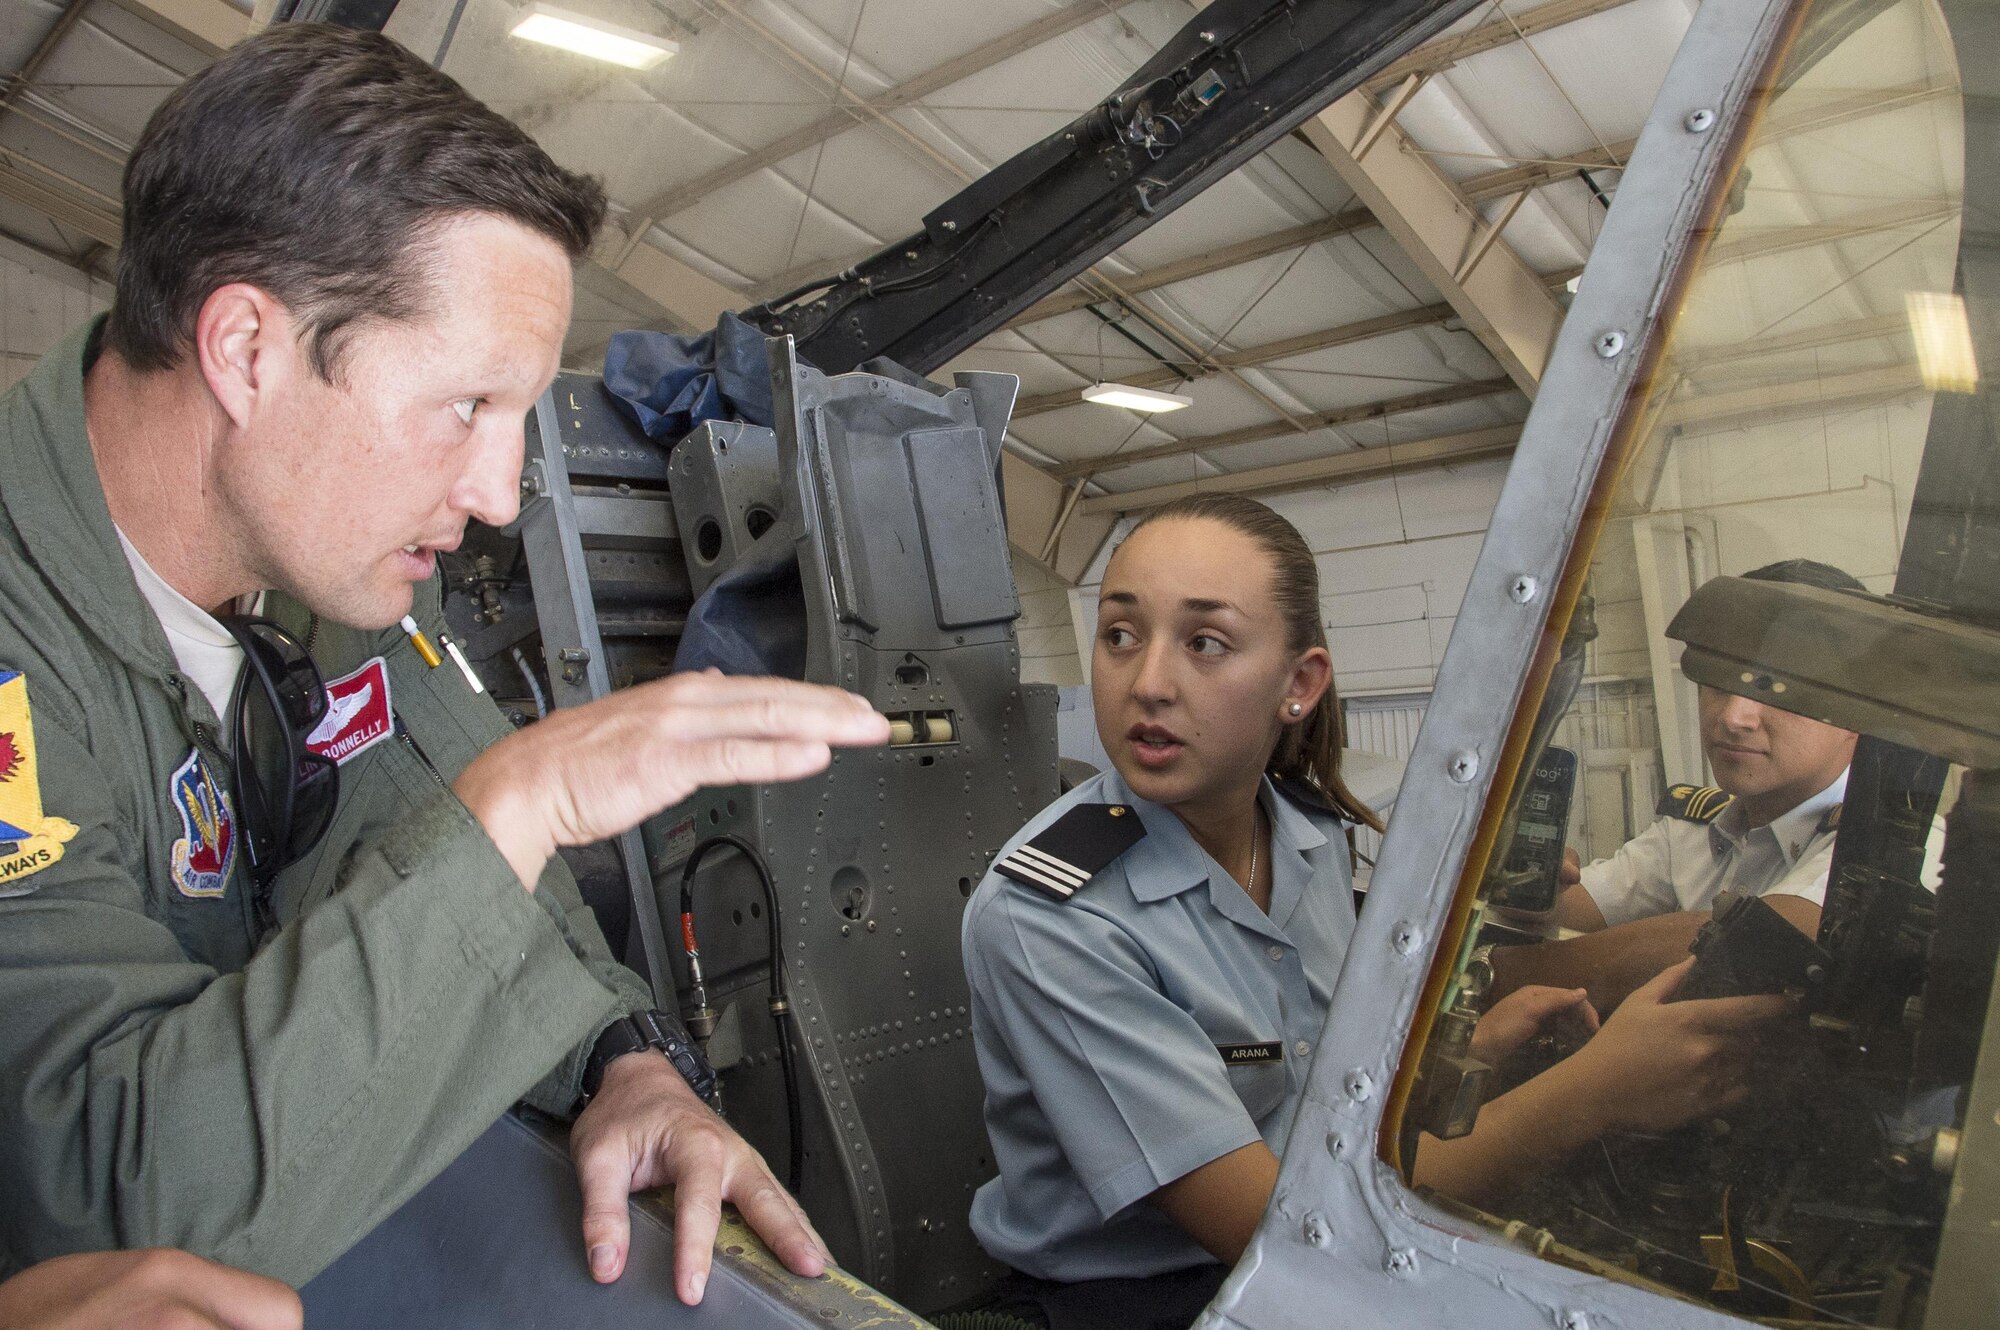 U.S. Air Force Lt. Col. Colin Donnelly, 355th Operations Group deputy commander, explains the function of each flight instrument to a cadet during a tour of an A-10 static display, at Davis-Monthan Air Force Base, Ariz., Oct. 13, 2016. The cadets are visiting Davis-Monthan AFB as part of Latin American Cadet Initiative which allows the top two senior cadets from up to 15 Latin American air force academies to visit the U.S. for three weeks to familiarize them with the U.S. Air Force and its various missions. (U.S. Air Force photo by Staff Sgt. Adam Grant)